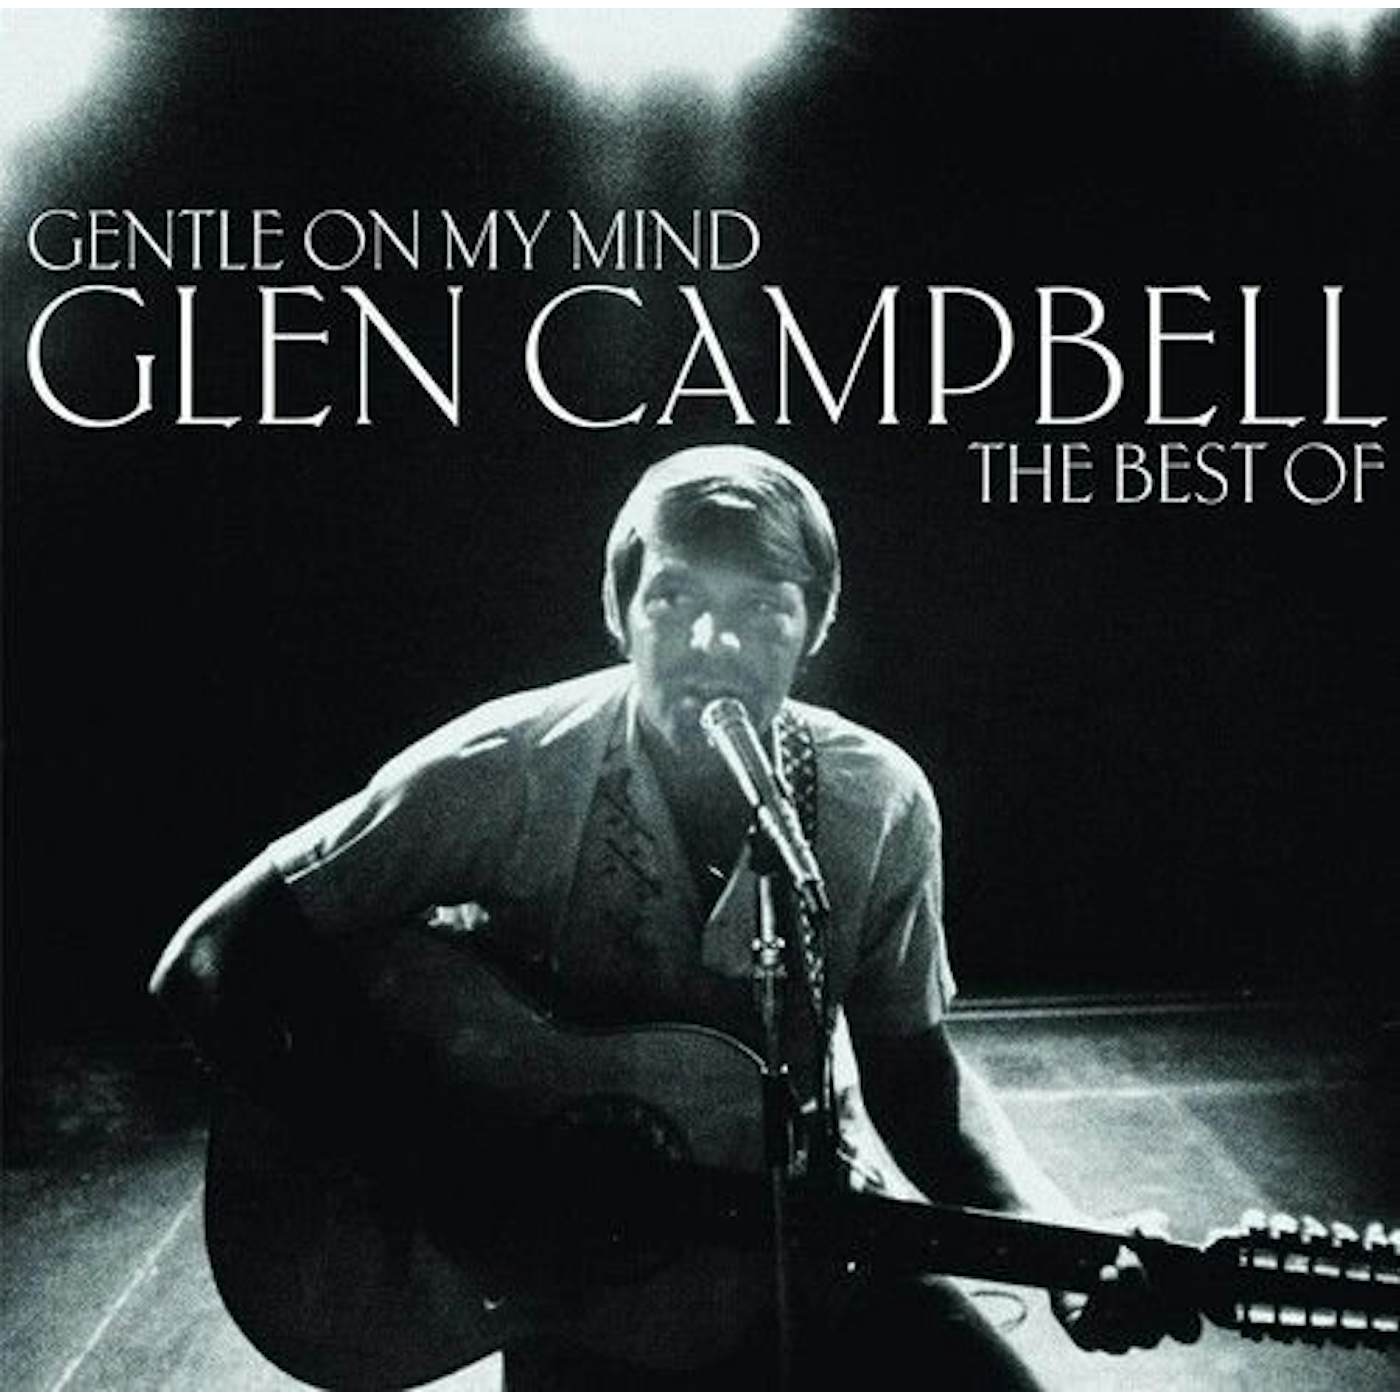 Glen Campbell GENTLE ON MY MIND: THE COLLECTION Vinyl Record